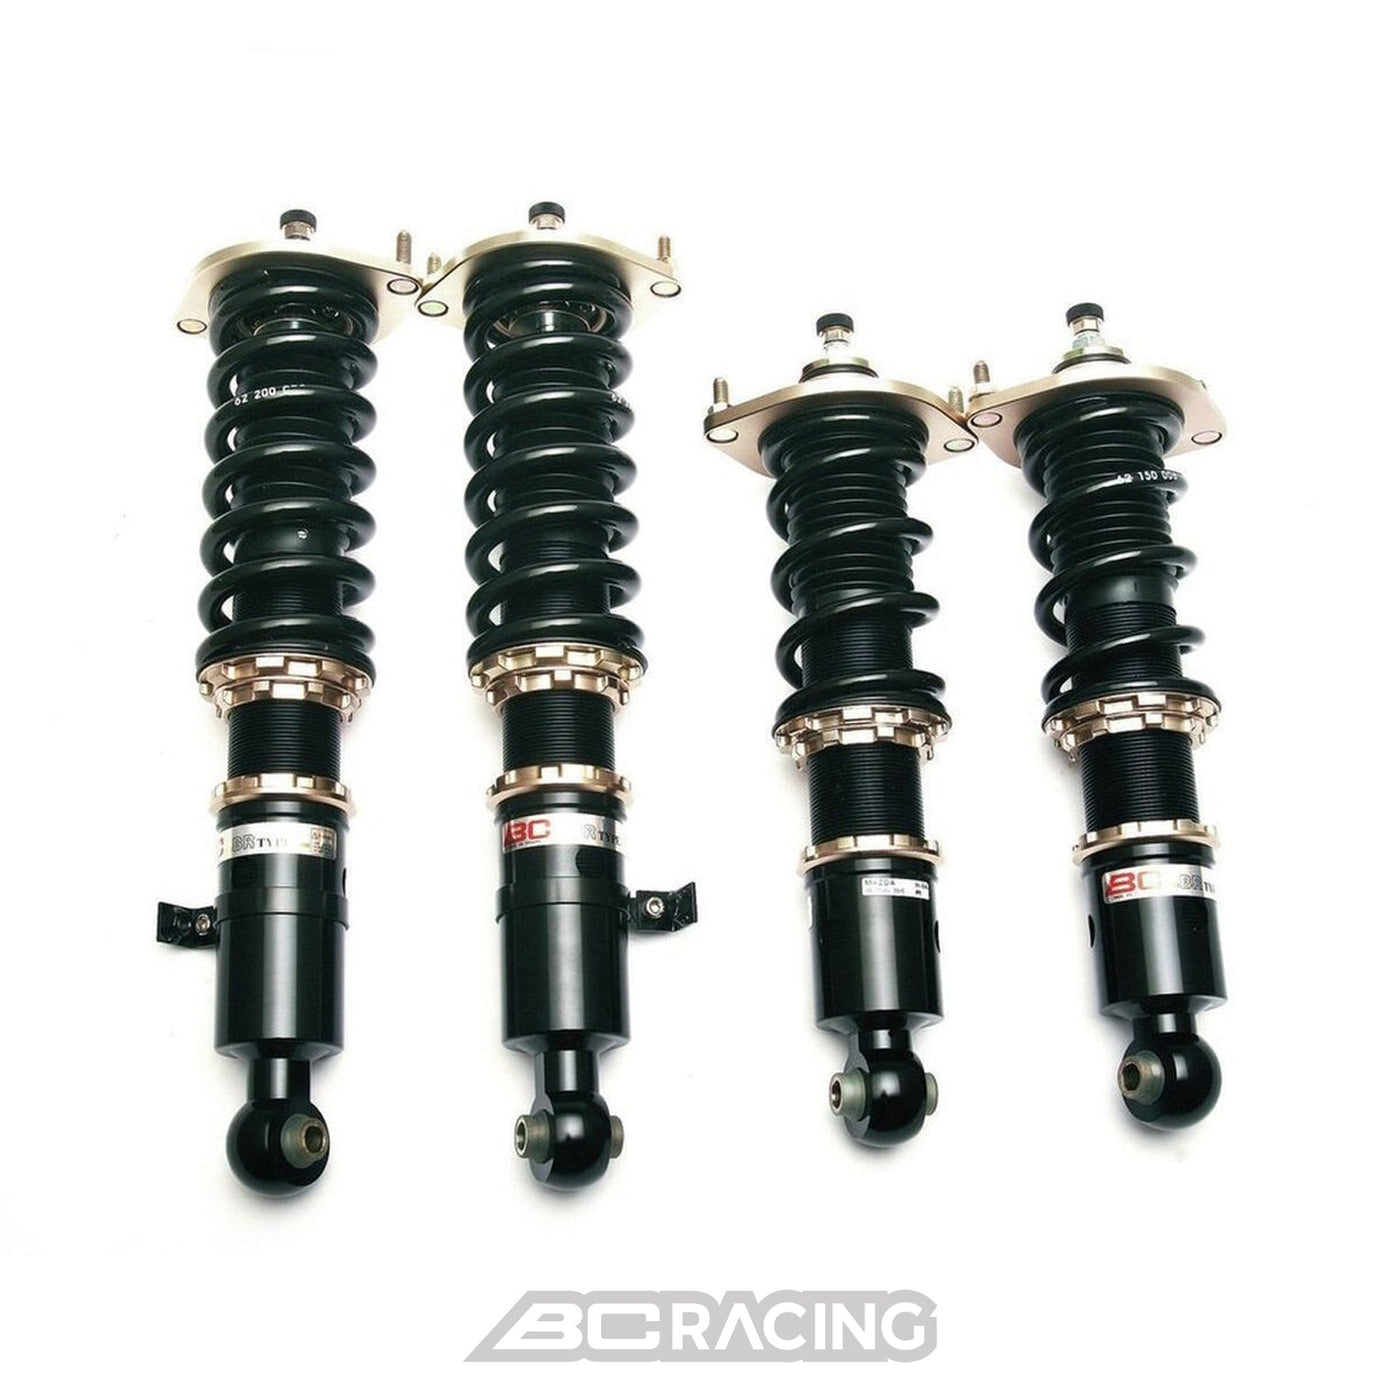 BC Racing Coilovers 2002-2009 BENZ E-Class Sedan (Airmatic**) NEEDS STEEL SPRING REAR LCAS